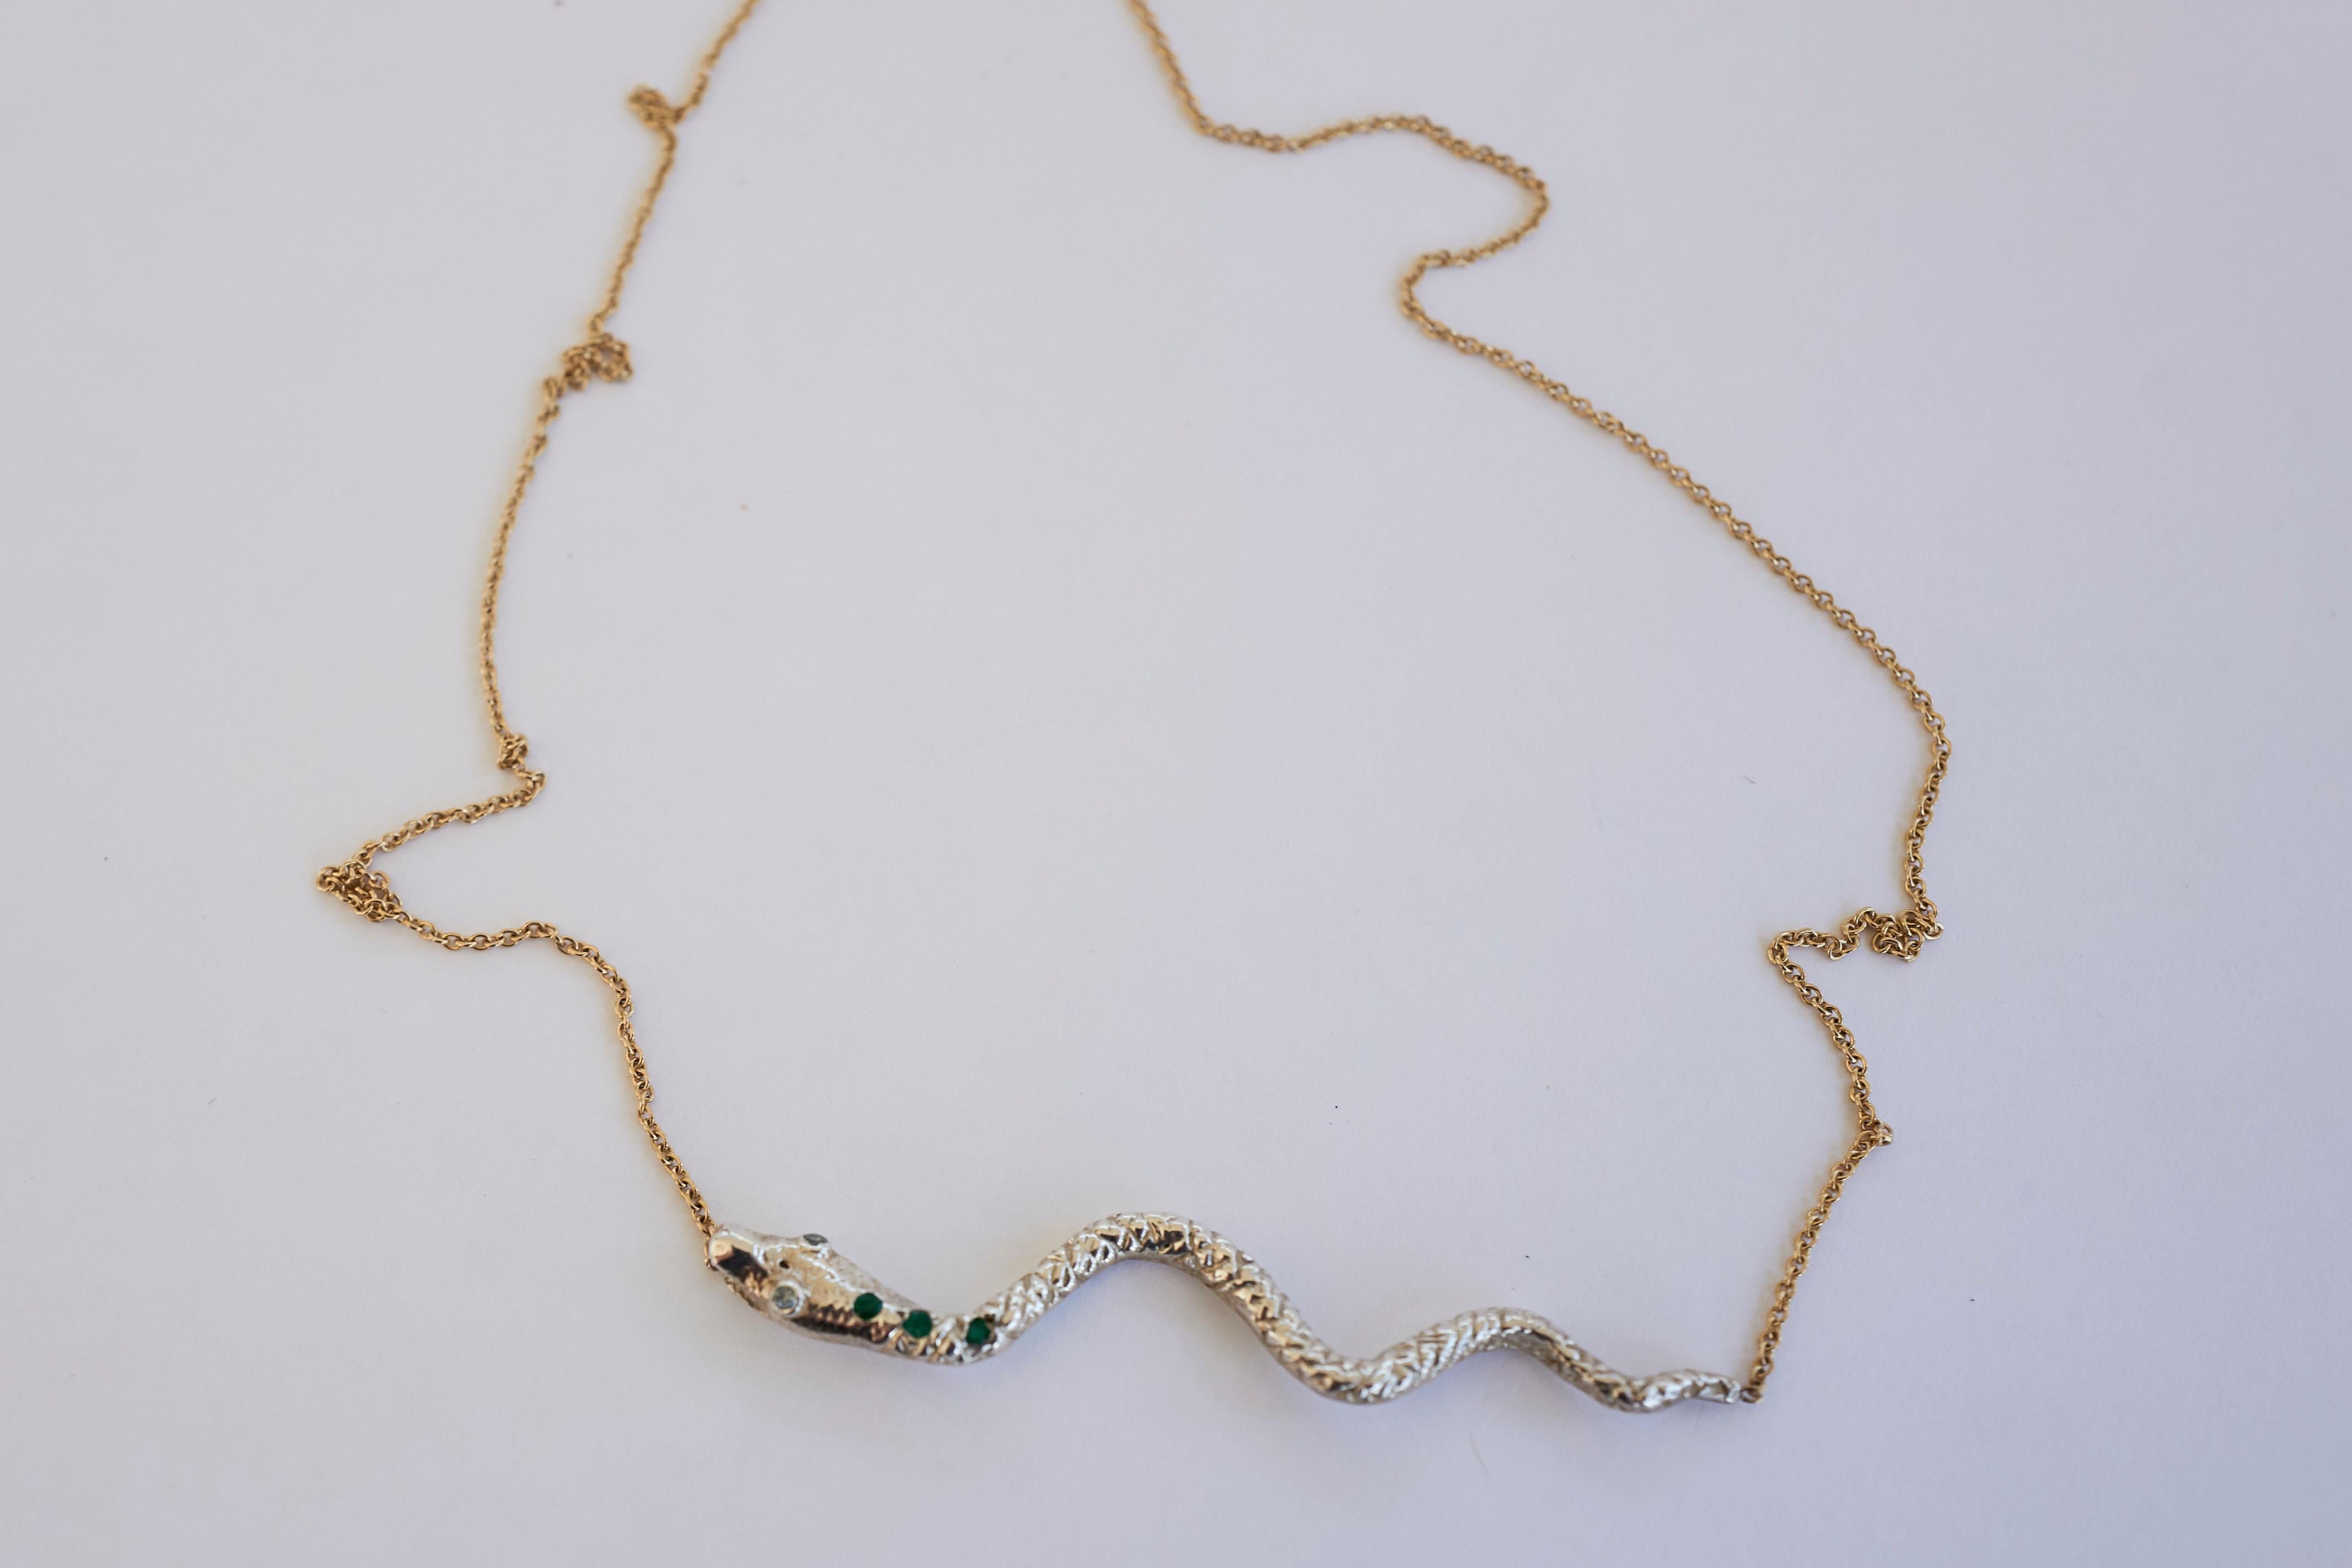 Emerald Aquamarine Snake Necklace Choker Chain Sterling Silver Animal J Dauphin In New Condition For Sale In Los Angeles, CA